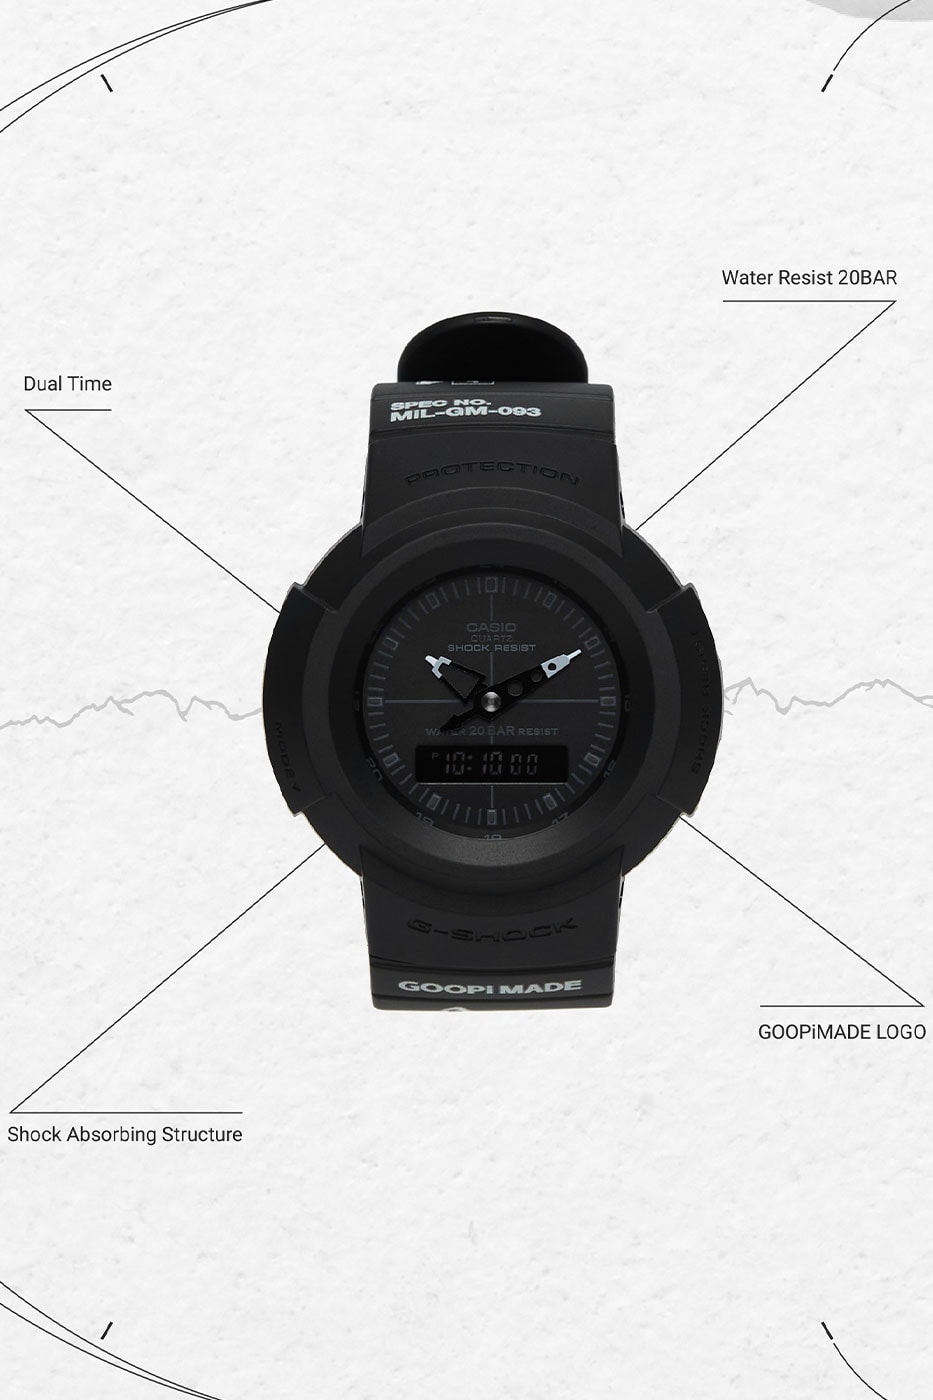 GOOPiMADE G-SHOCK Without APEX AW-500BBGO Watch Release Info Buy Price